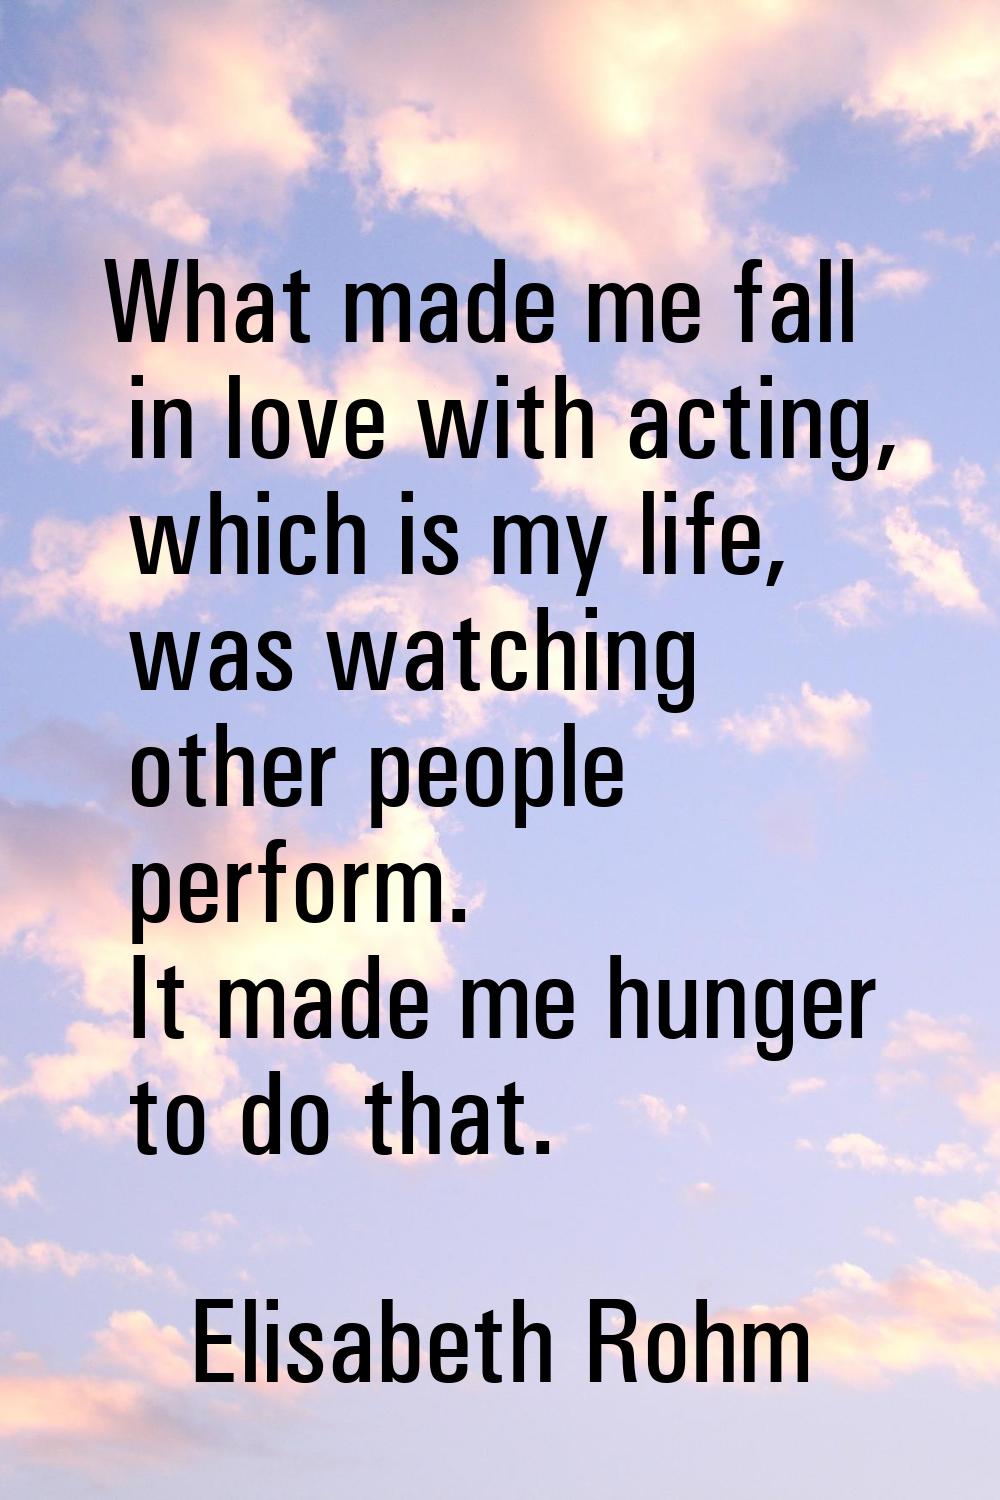 What made me fall in love with acting, which is my life, was watching other people perform. It made